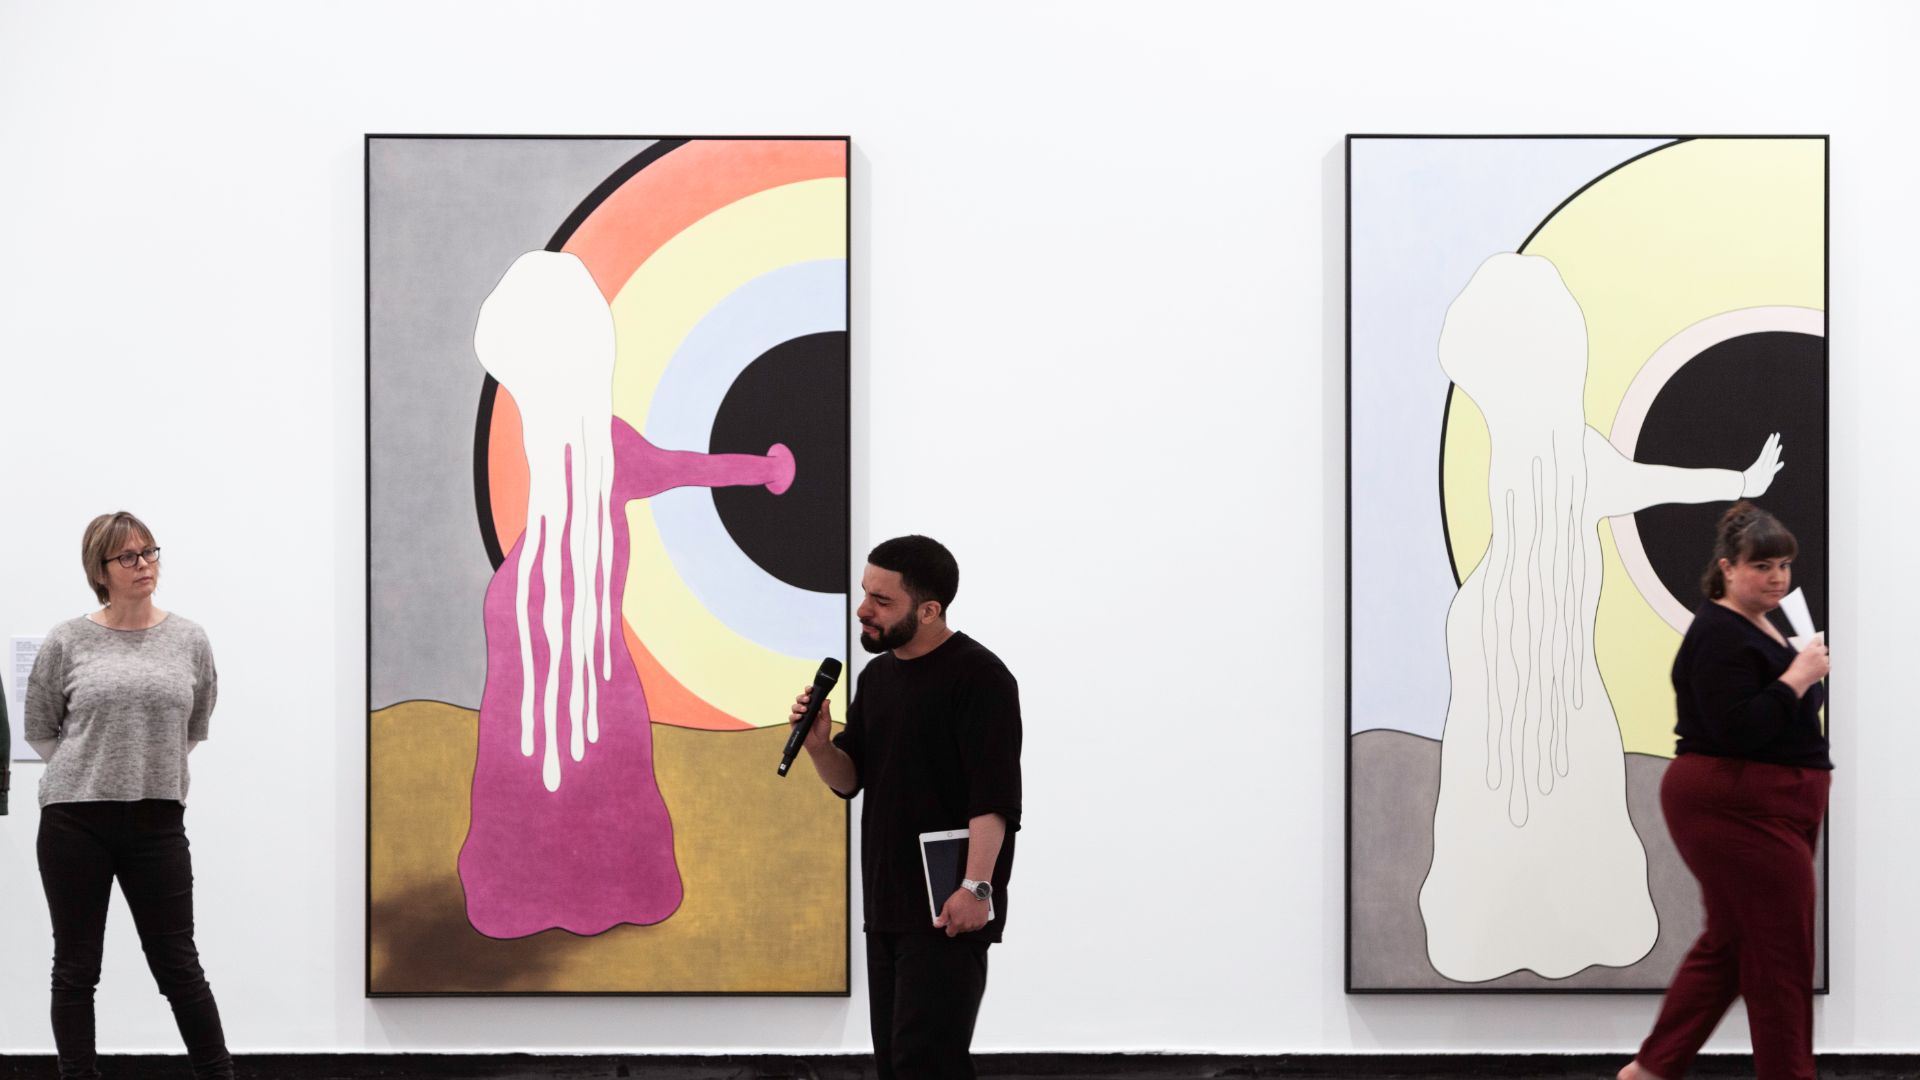 Person talking into microphone in front of two artworks in gallery